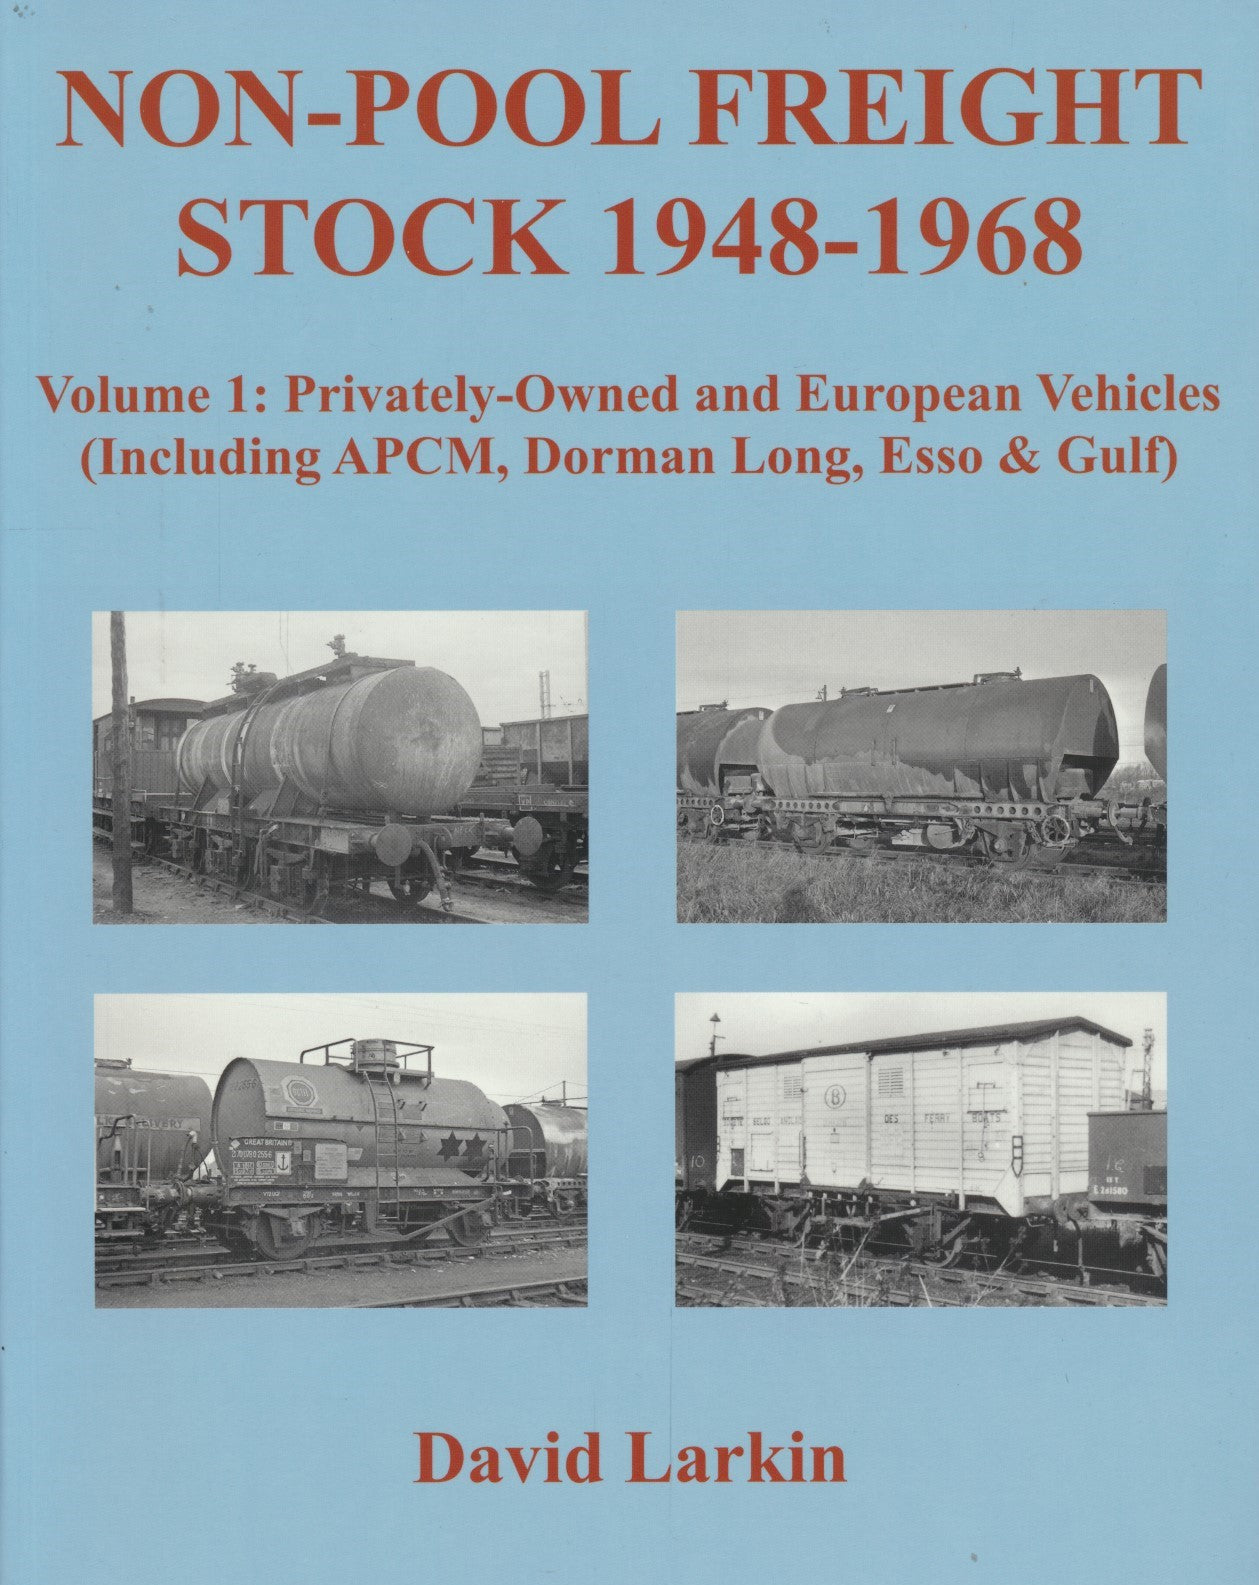 Non-Pool Freight Stock 1948 - 1968 Volume 1: Privately Owned and European Vehicles (Including APCM, Dorman Long, Esso & Gulf)